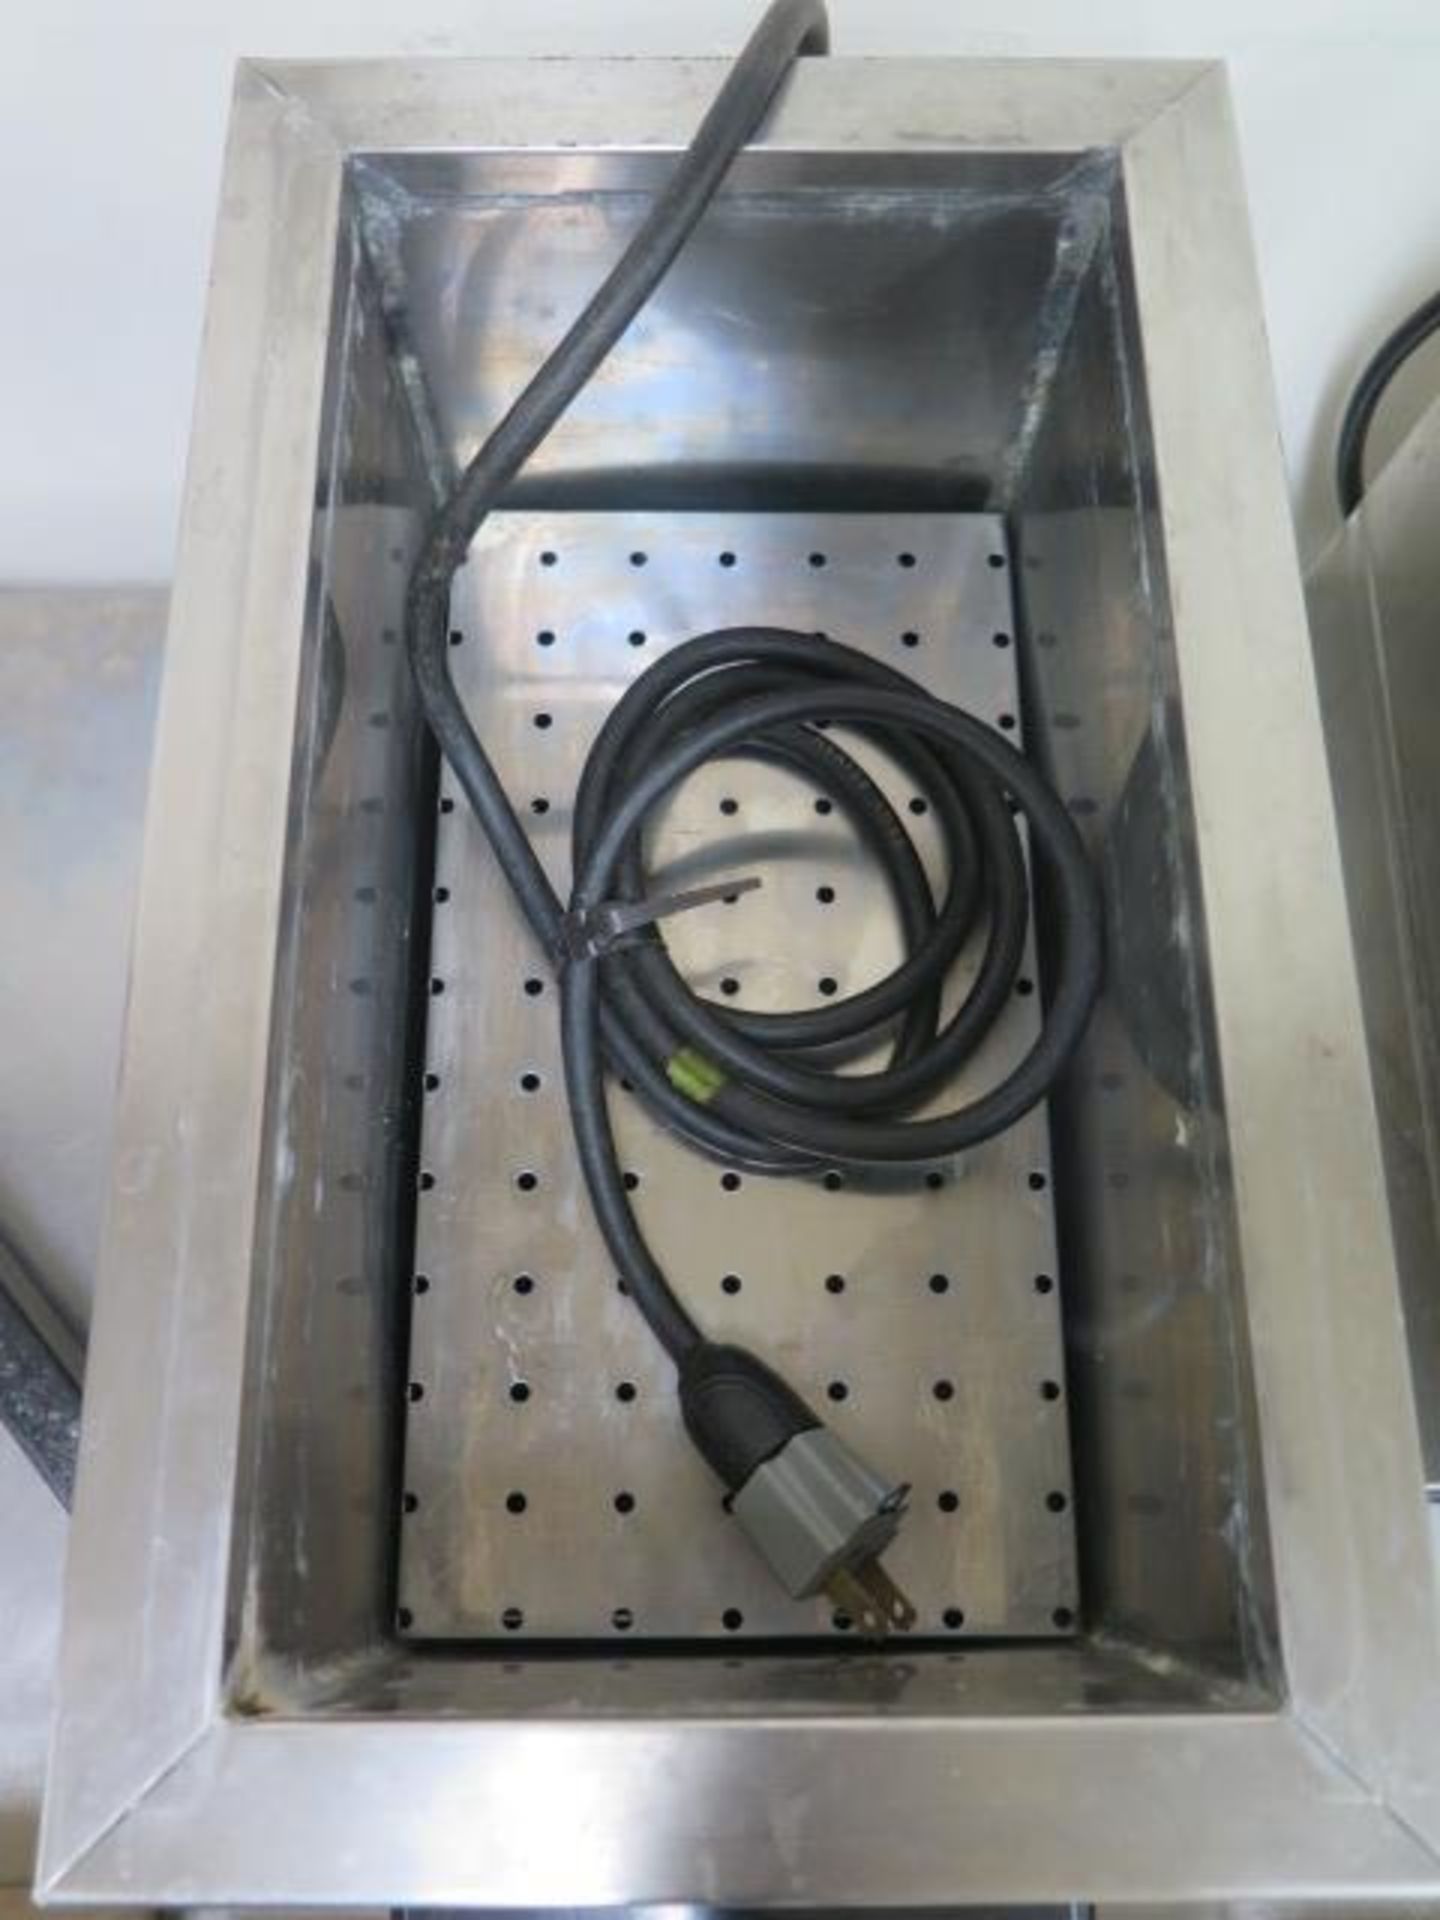 Lab-Line mdl. 3000-2 Heated Bath s/n 1268 (SOLD AS-IS - NO WARRANTY) - Image 3 of 4